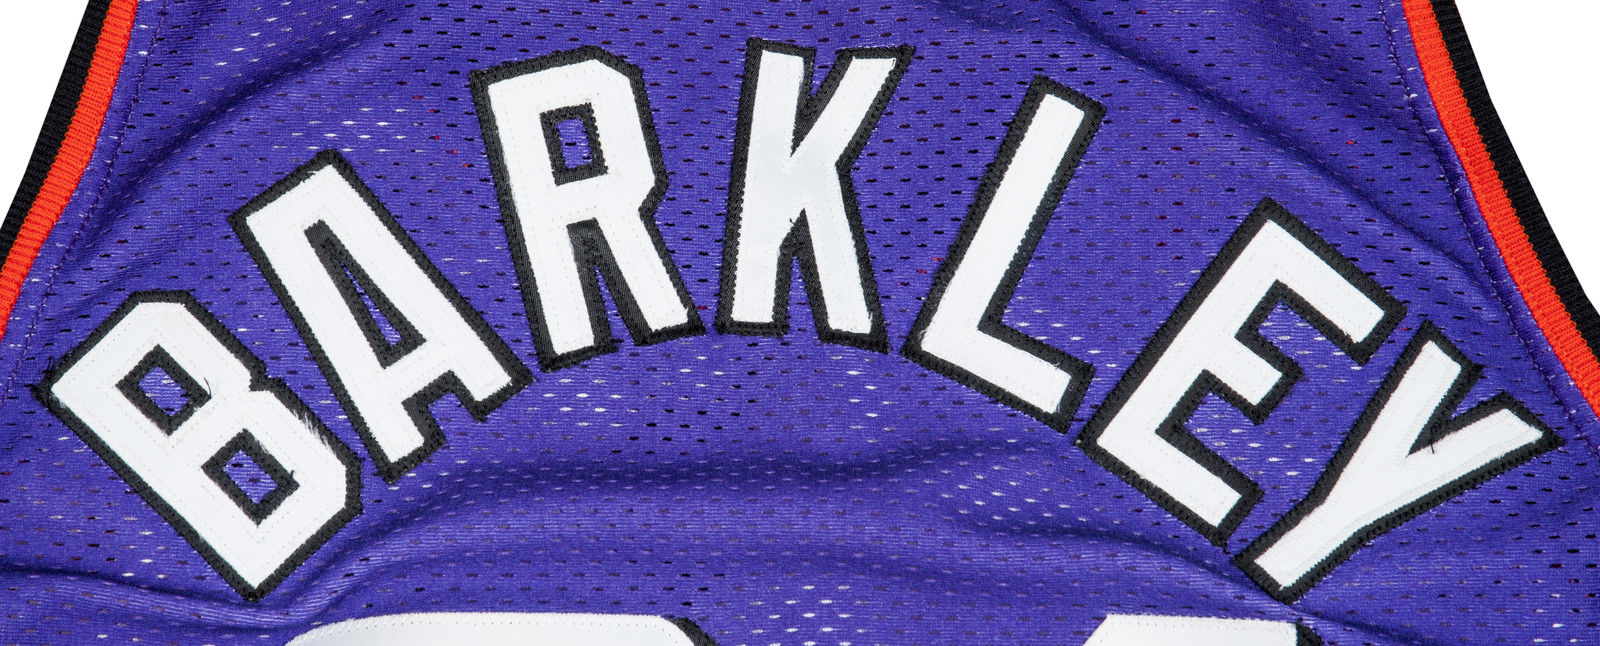 Collectable Presents: A Charles Barkley game-worn Suns jersey 